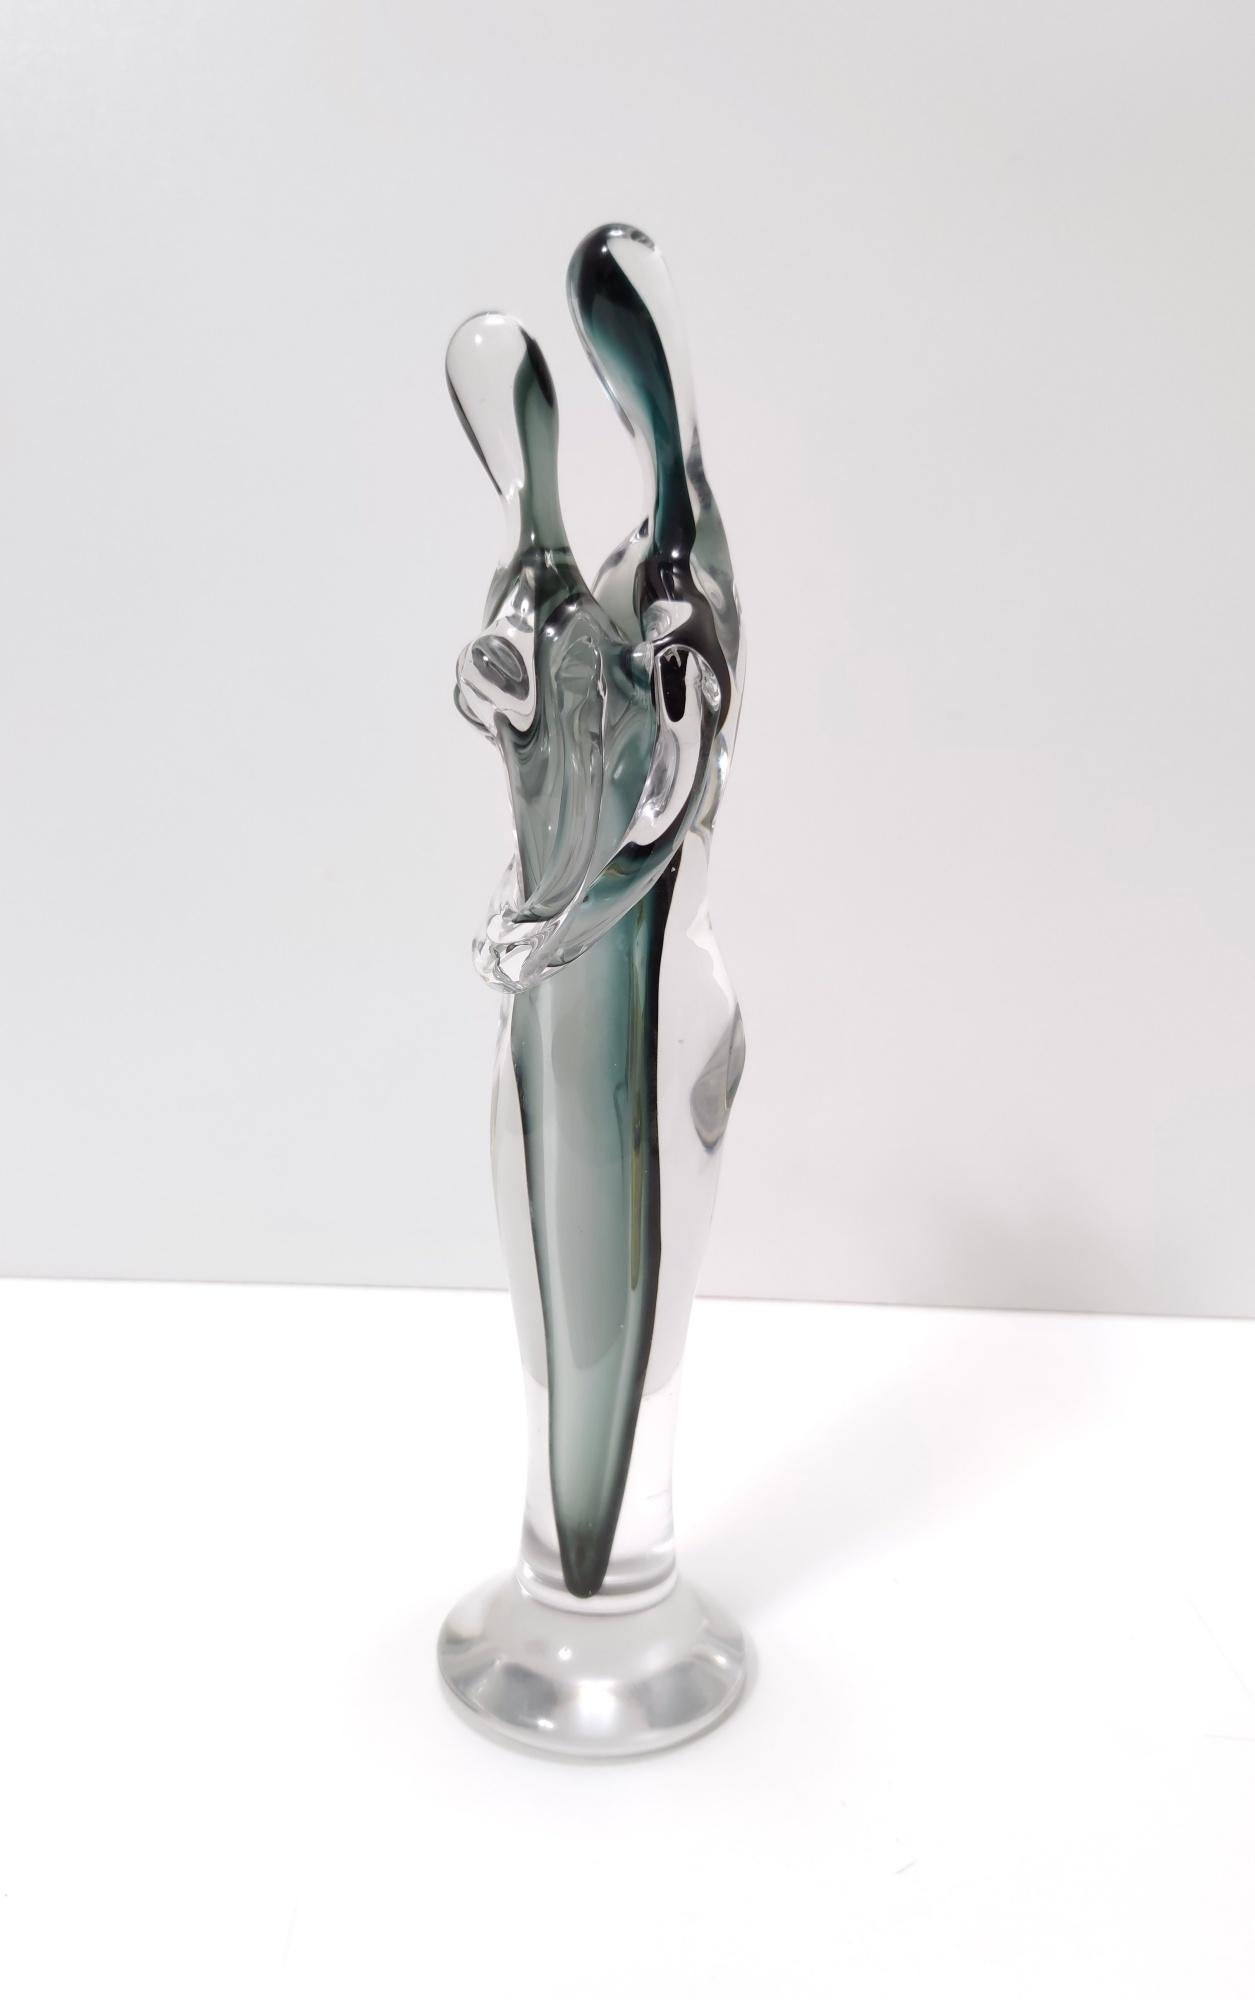 Mid-20th Century Ocean Green Murano Glass Decorative Item of Two Lovers Ascribable to Seguso